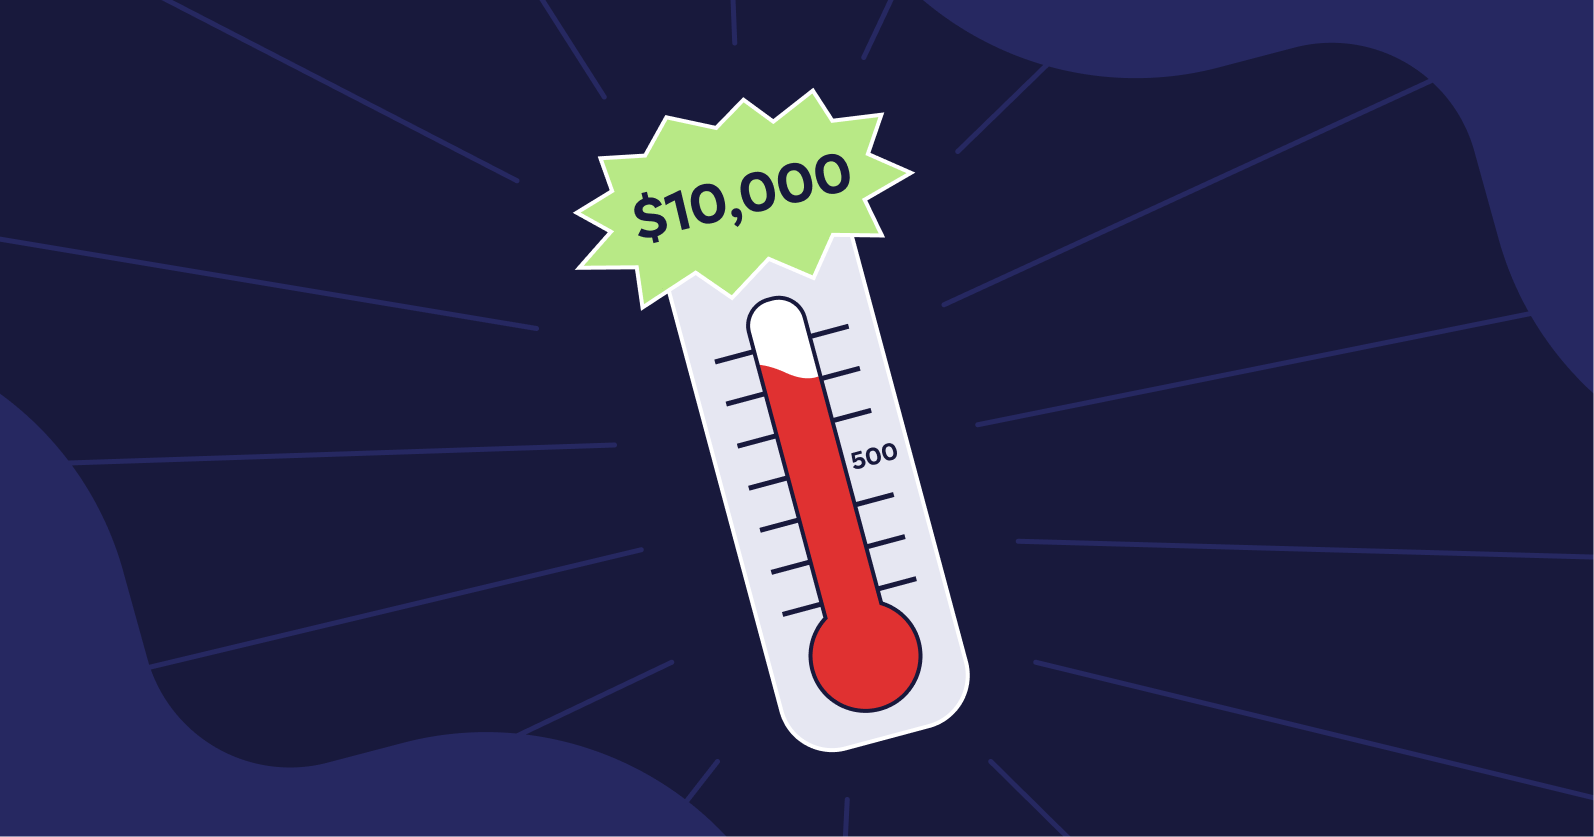 Illustration of a thermometer with a $10,000 goal.